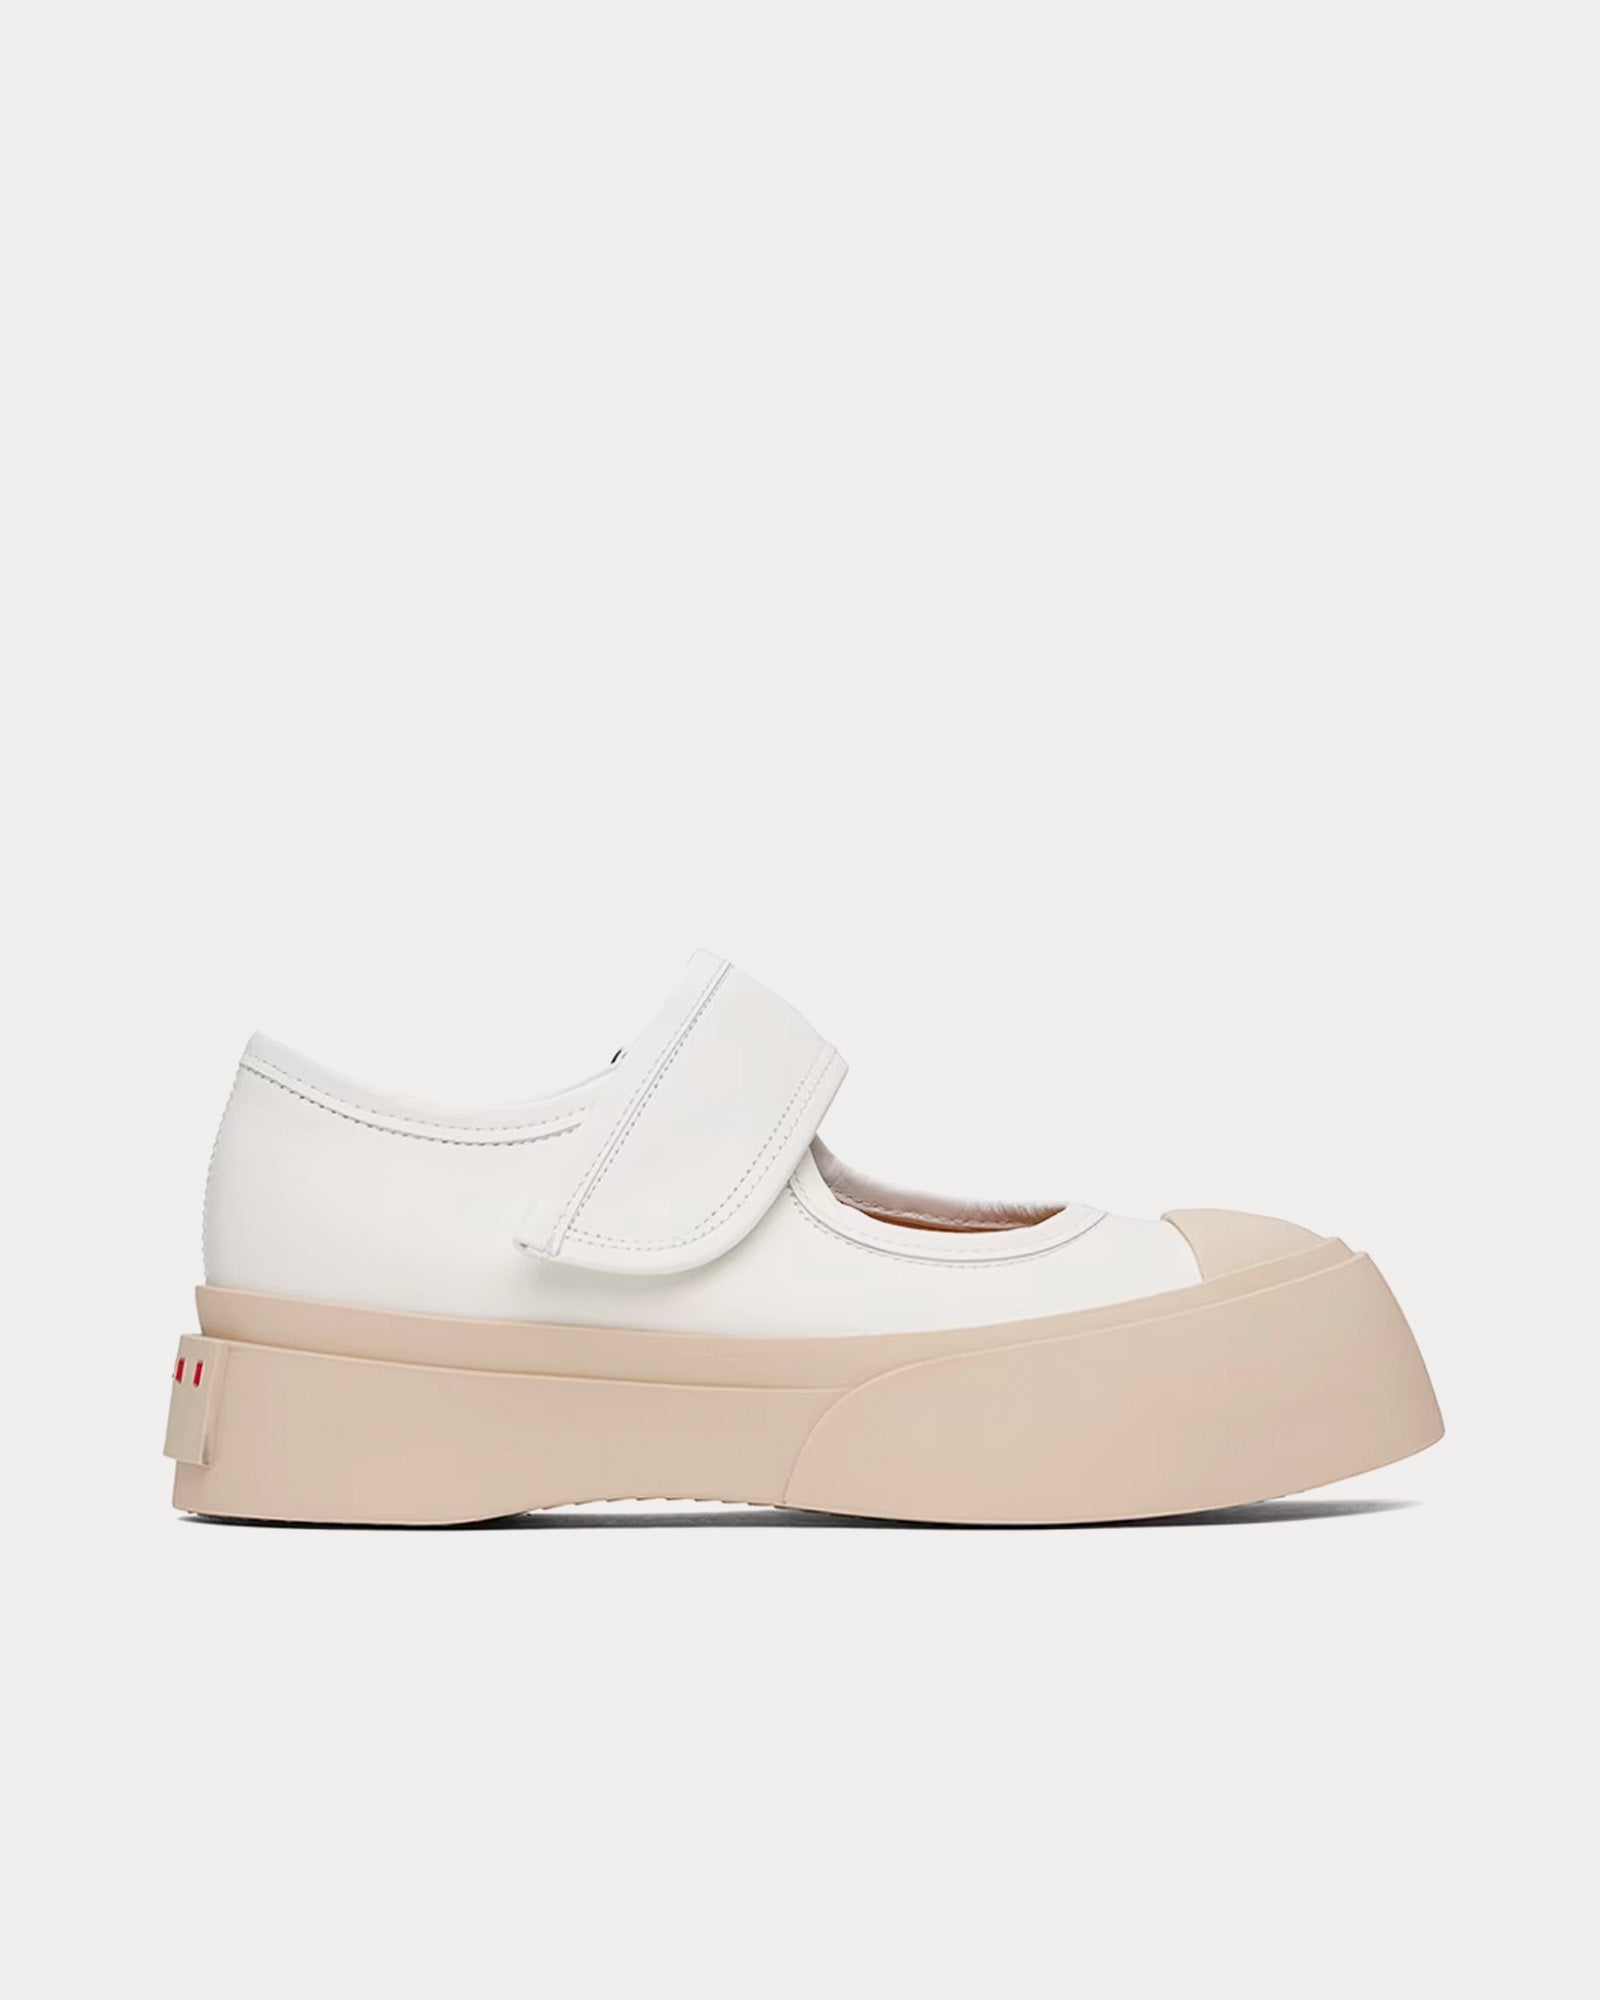 Marni - Mary Jane Leather White Slip On Sneakers